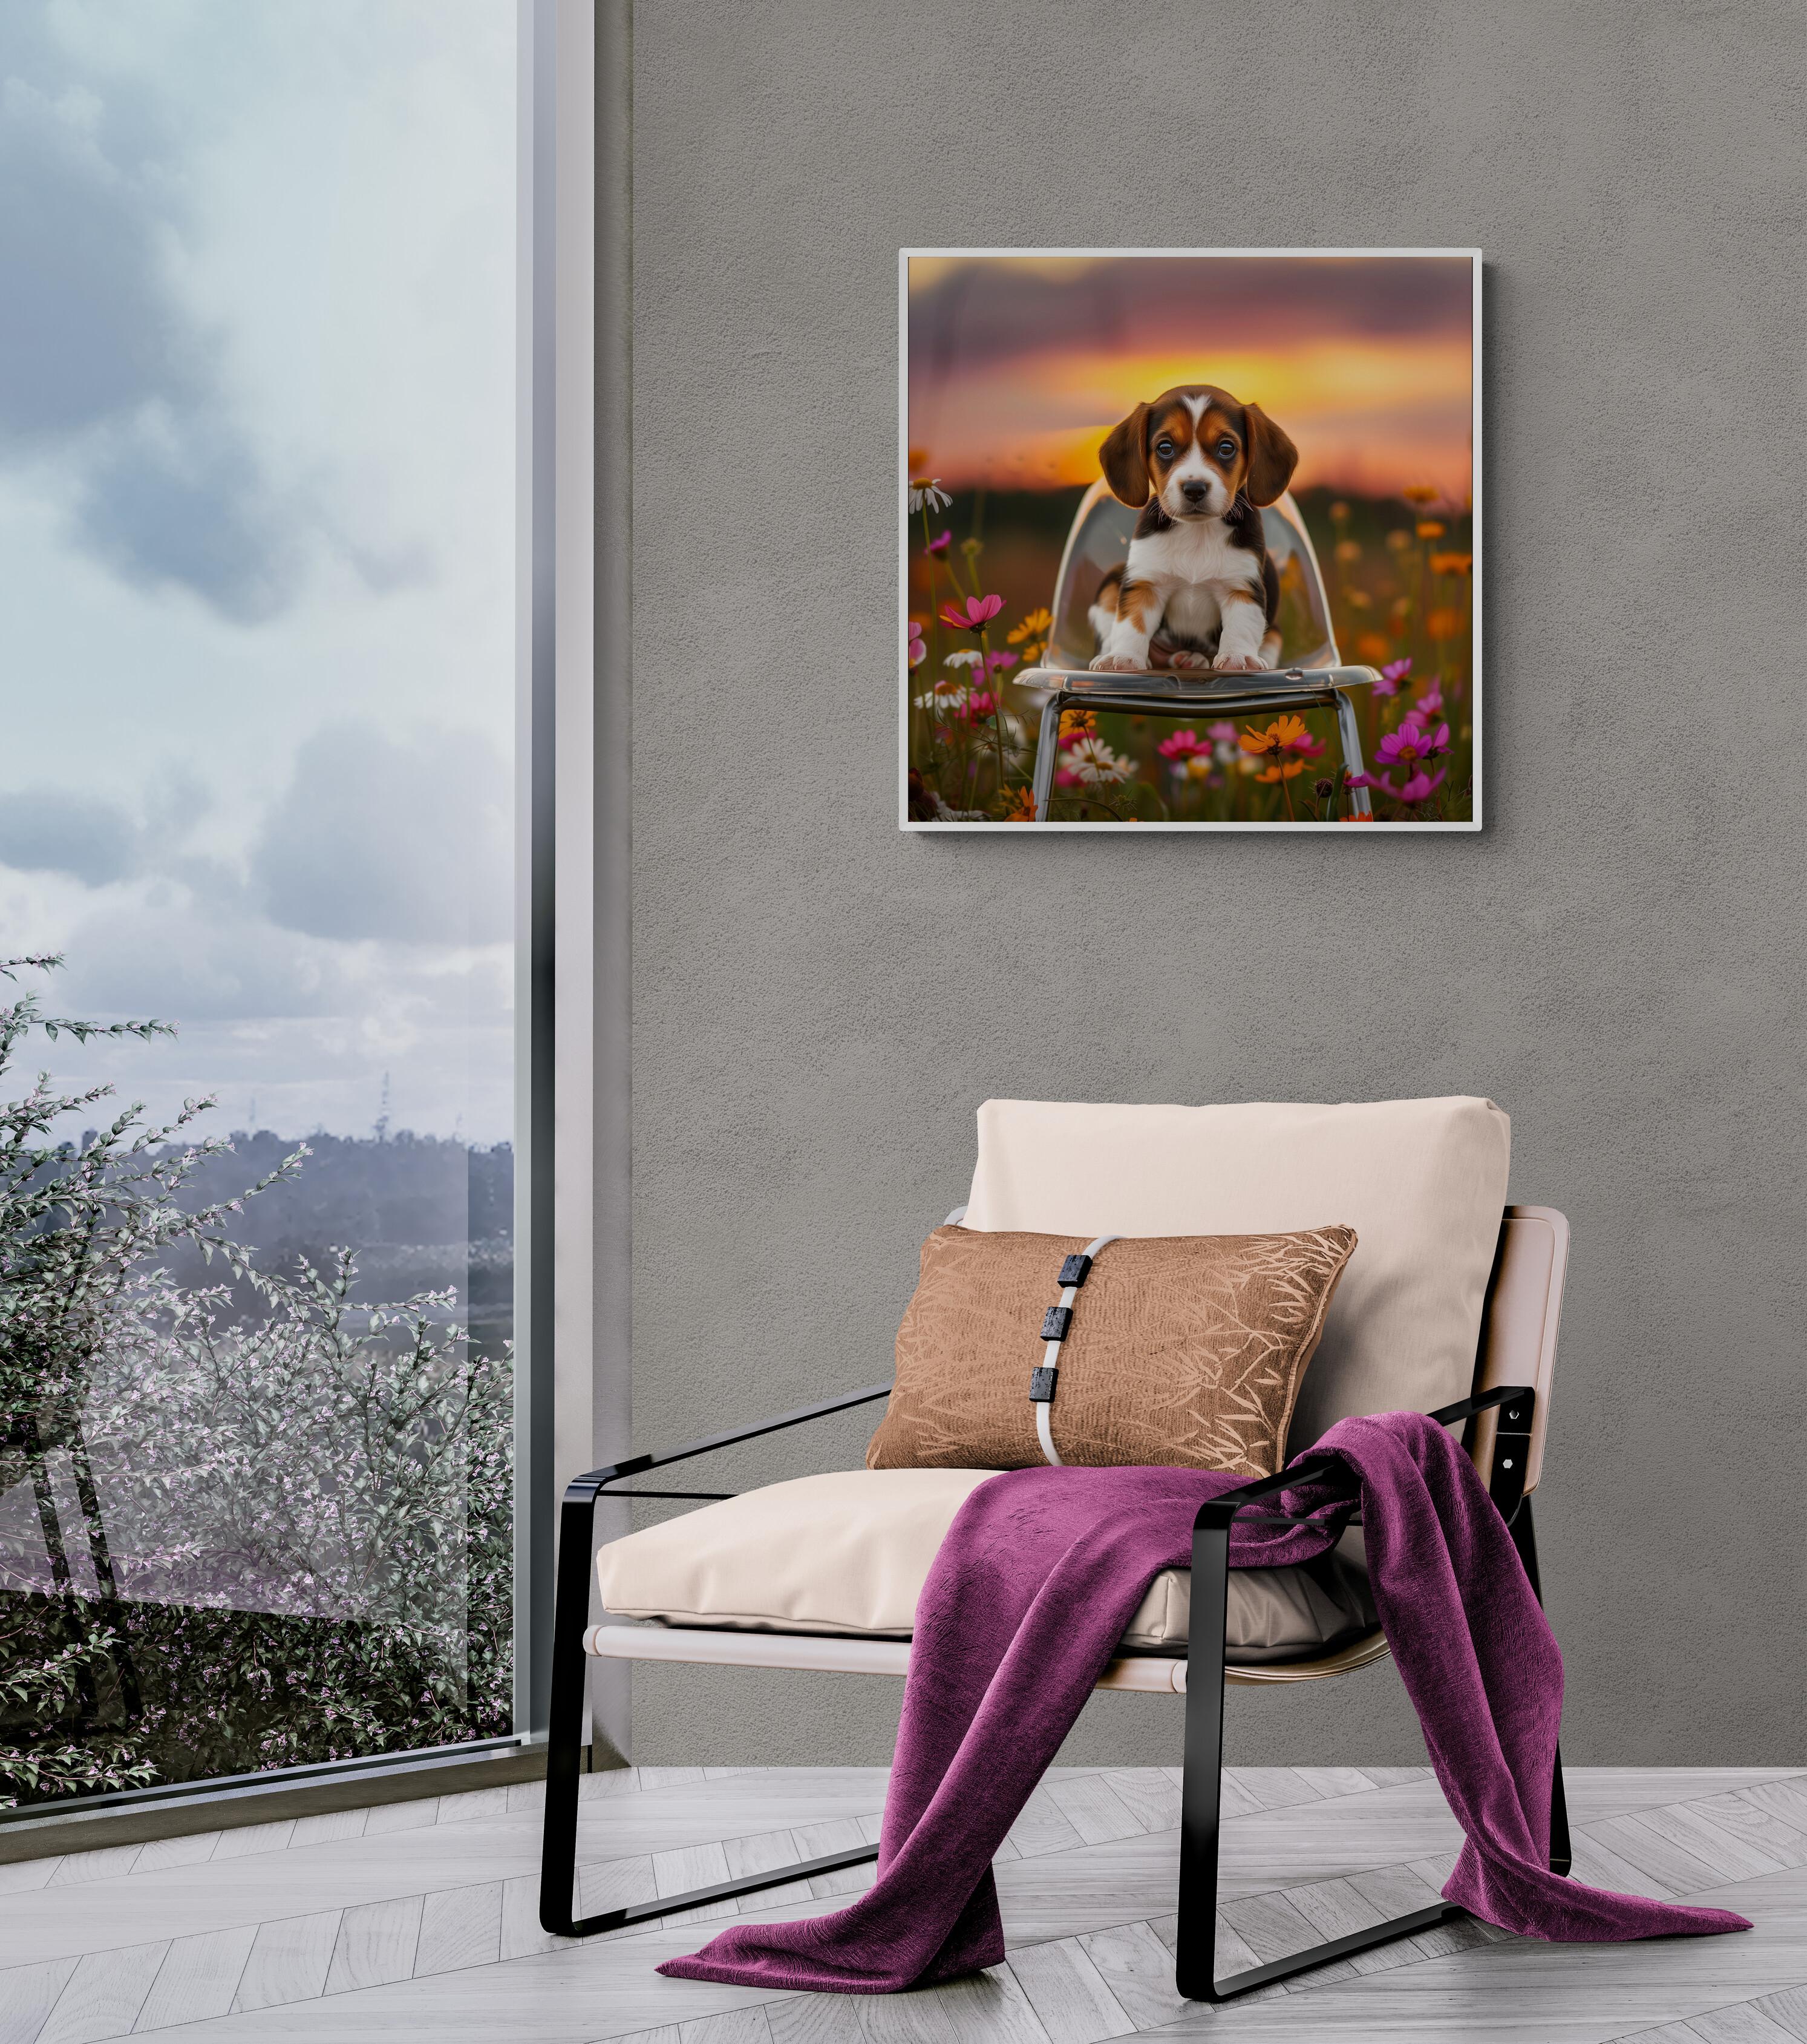 Sir Barksalot - Beagle (Puppy, Dog, Portrait, Staged, Funny, 40% OFF LIST PRICE) - Photograph by Lord Fauntleroy